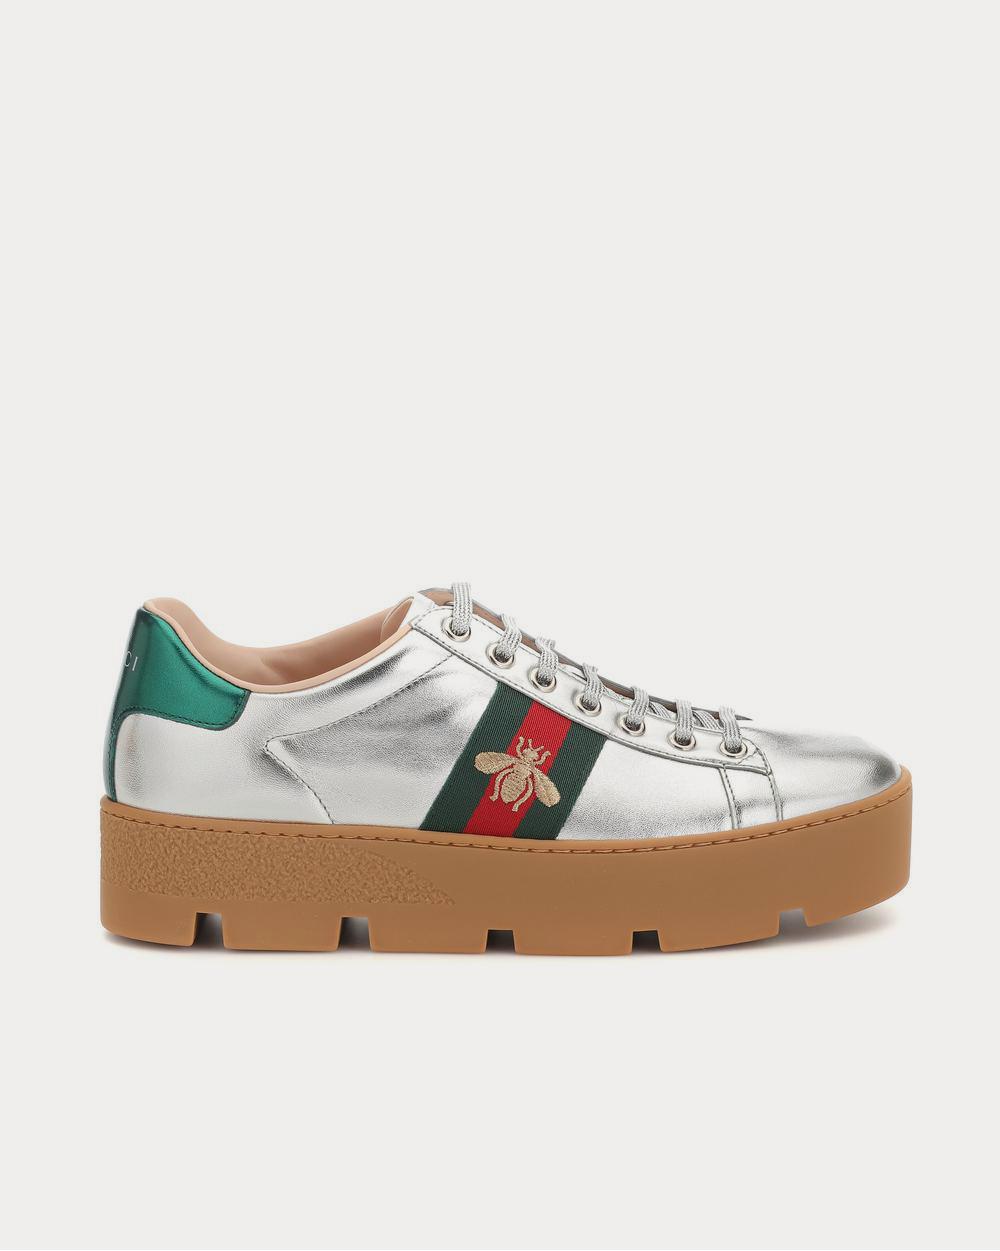 Gucci Ace leather platform Silver Top - in Peace